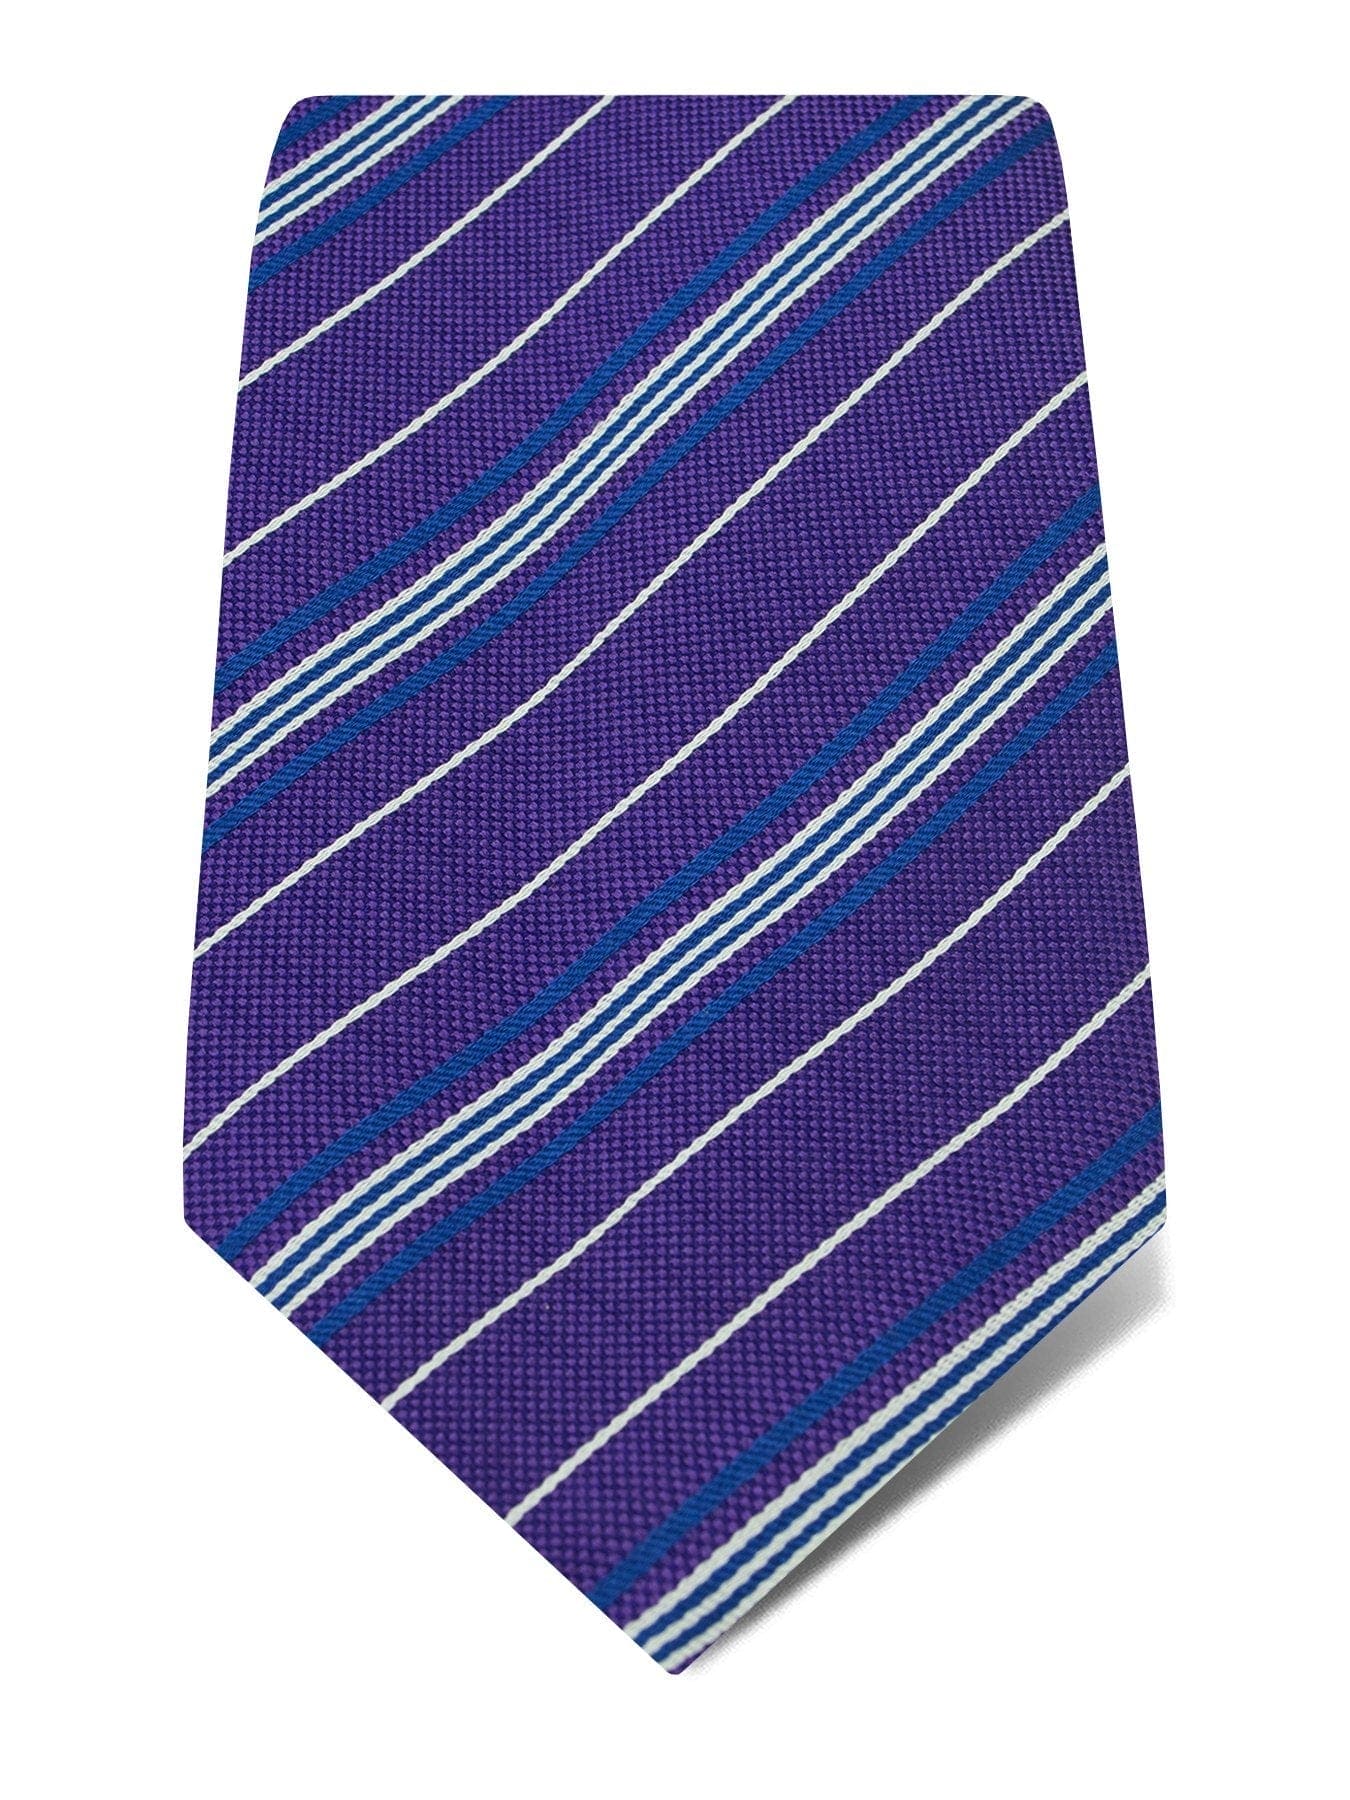 Purple Woven Silk Tie with Royal Blue & White Stripes